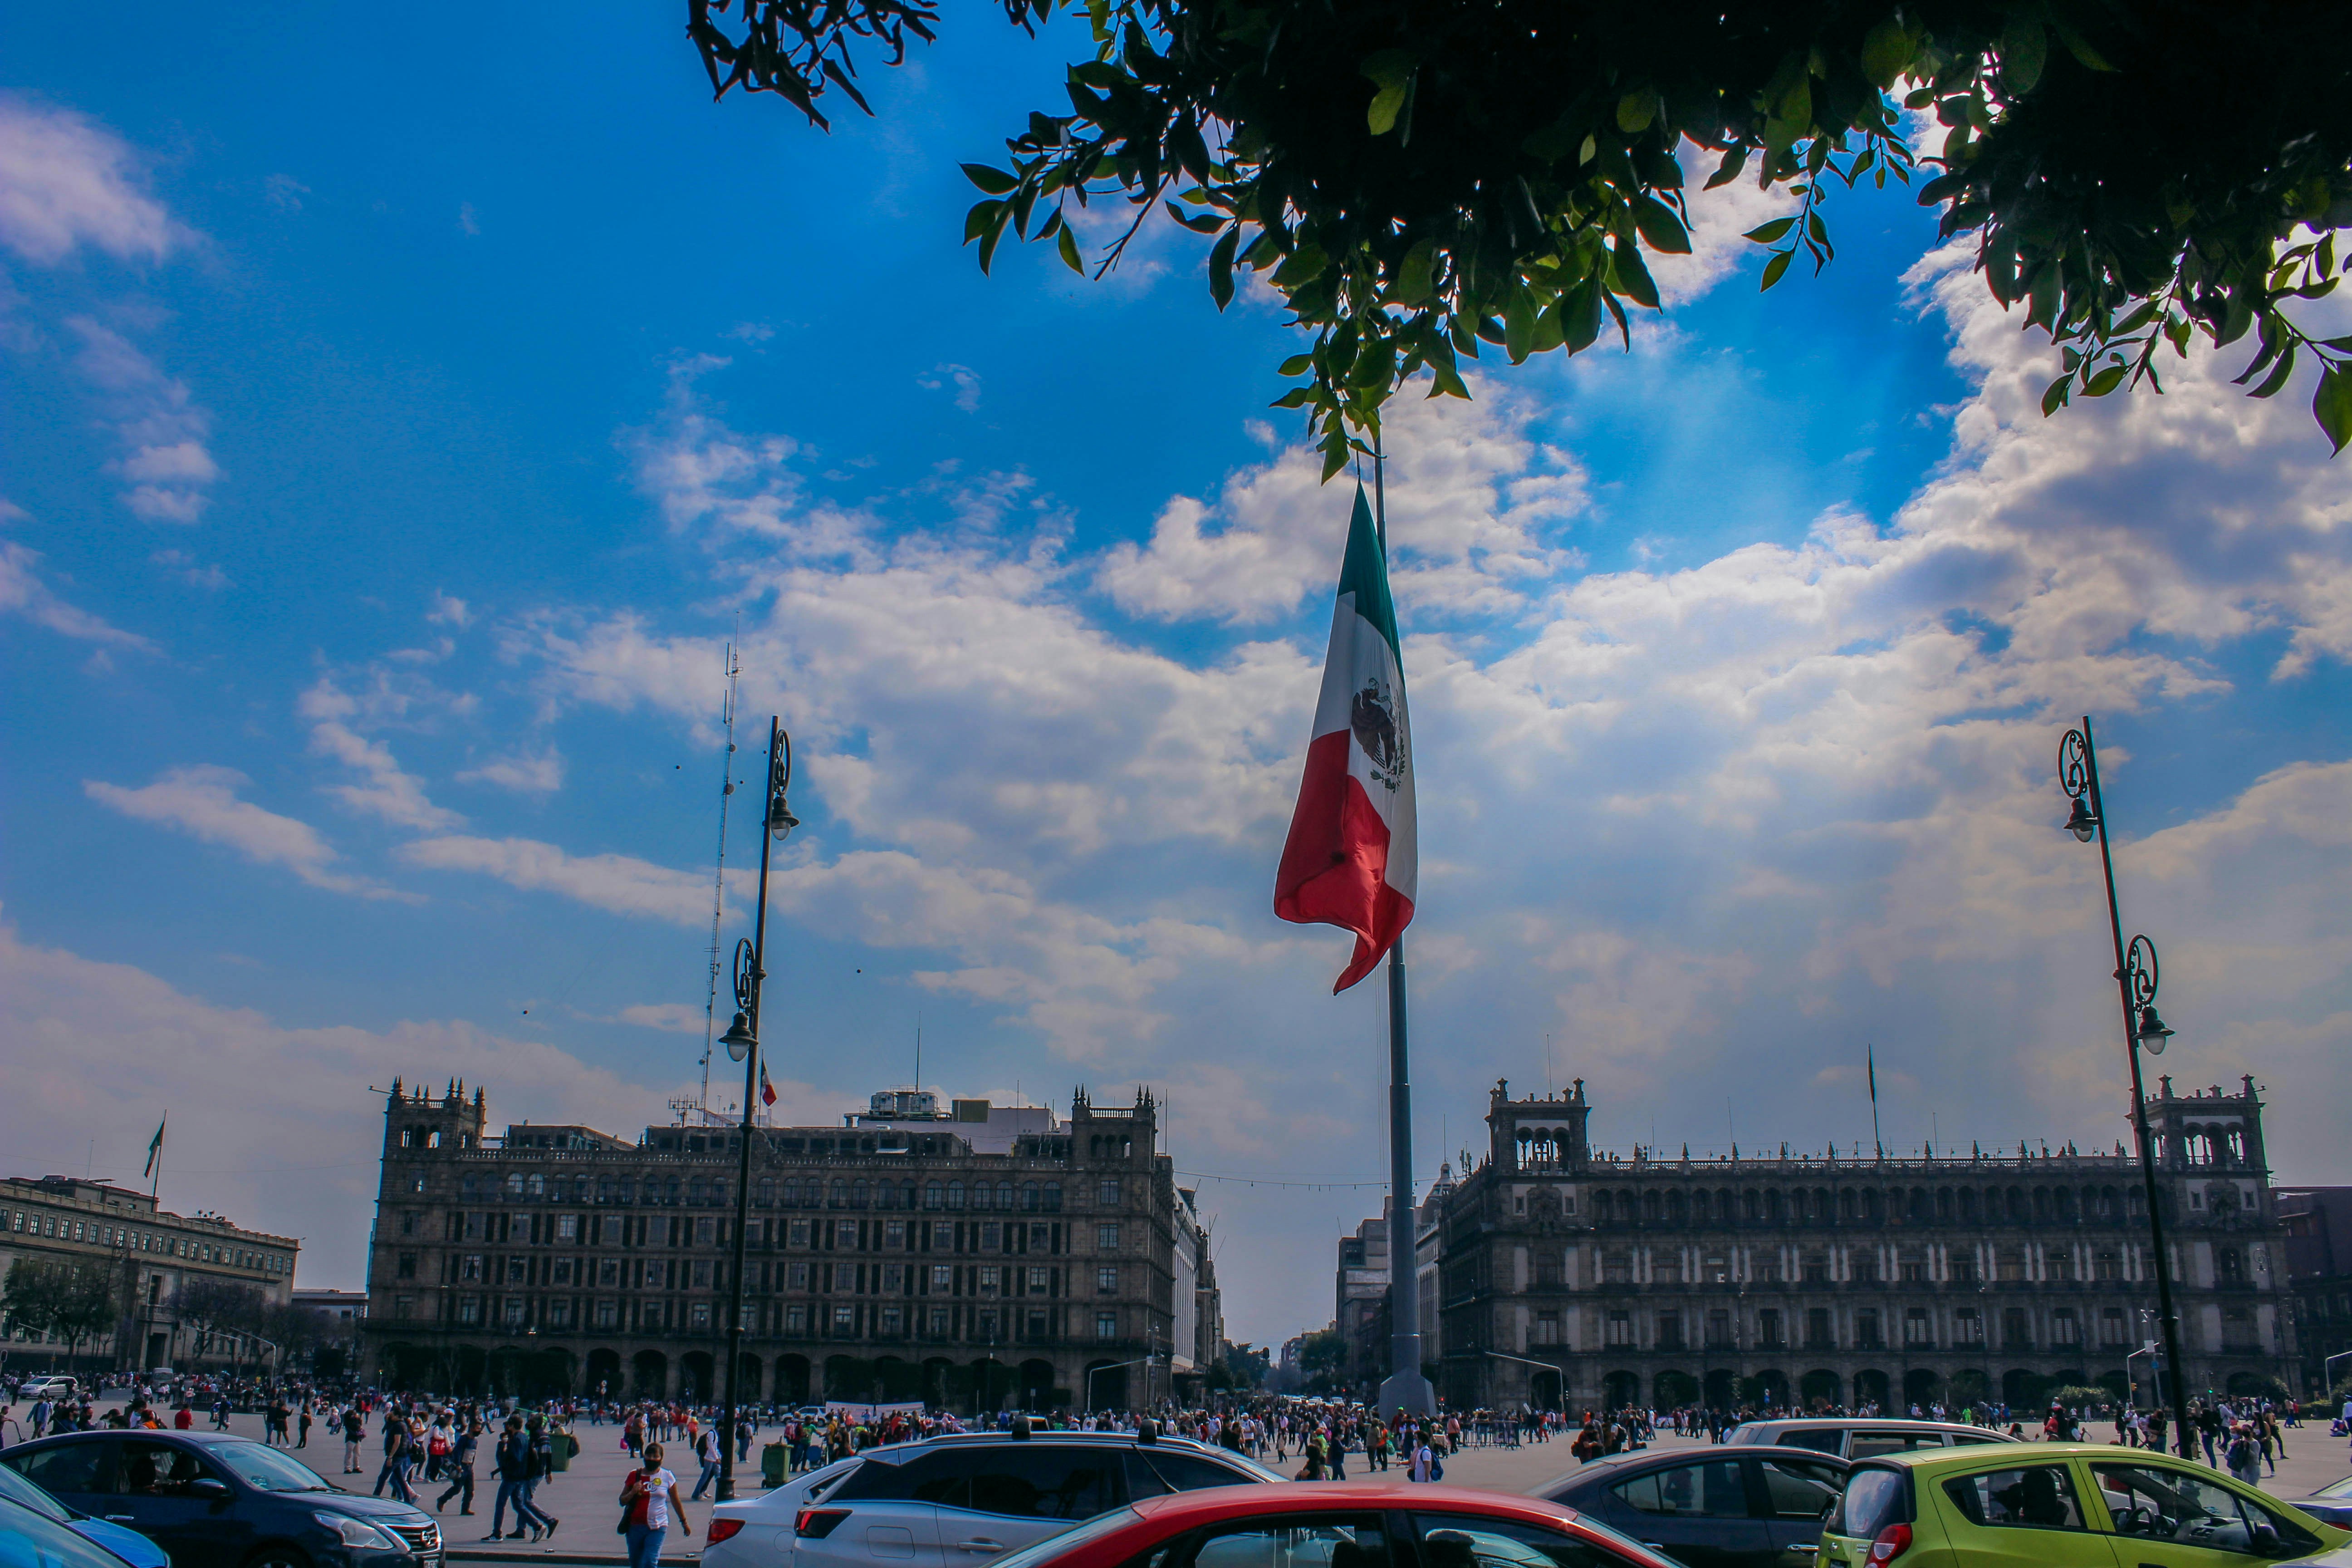 Choose from a curated selection of Mexico photos. Always free on Unsplash.